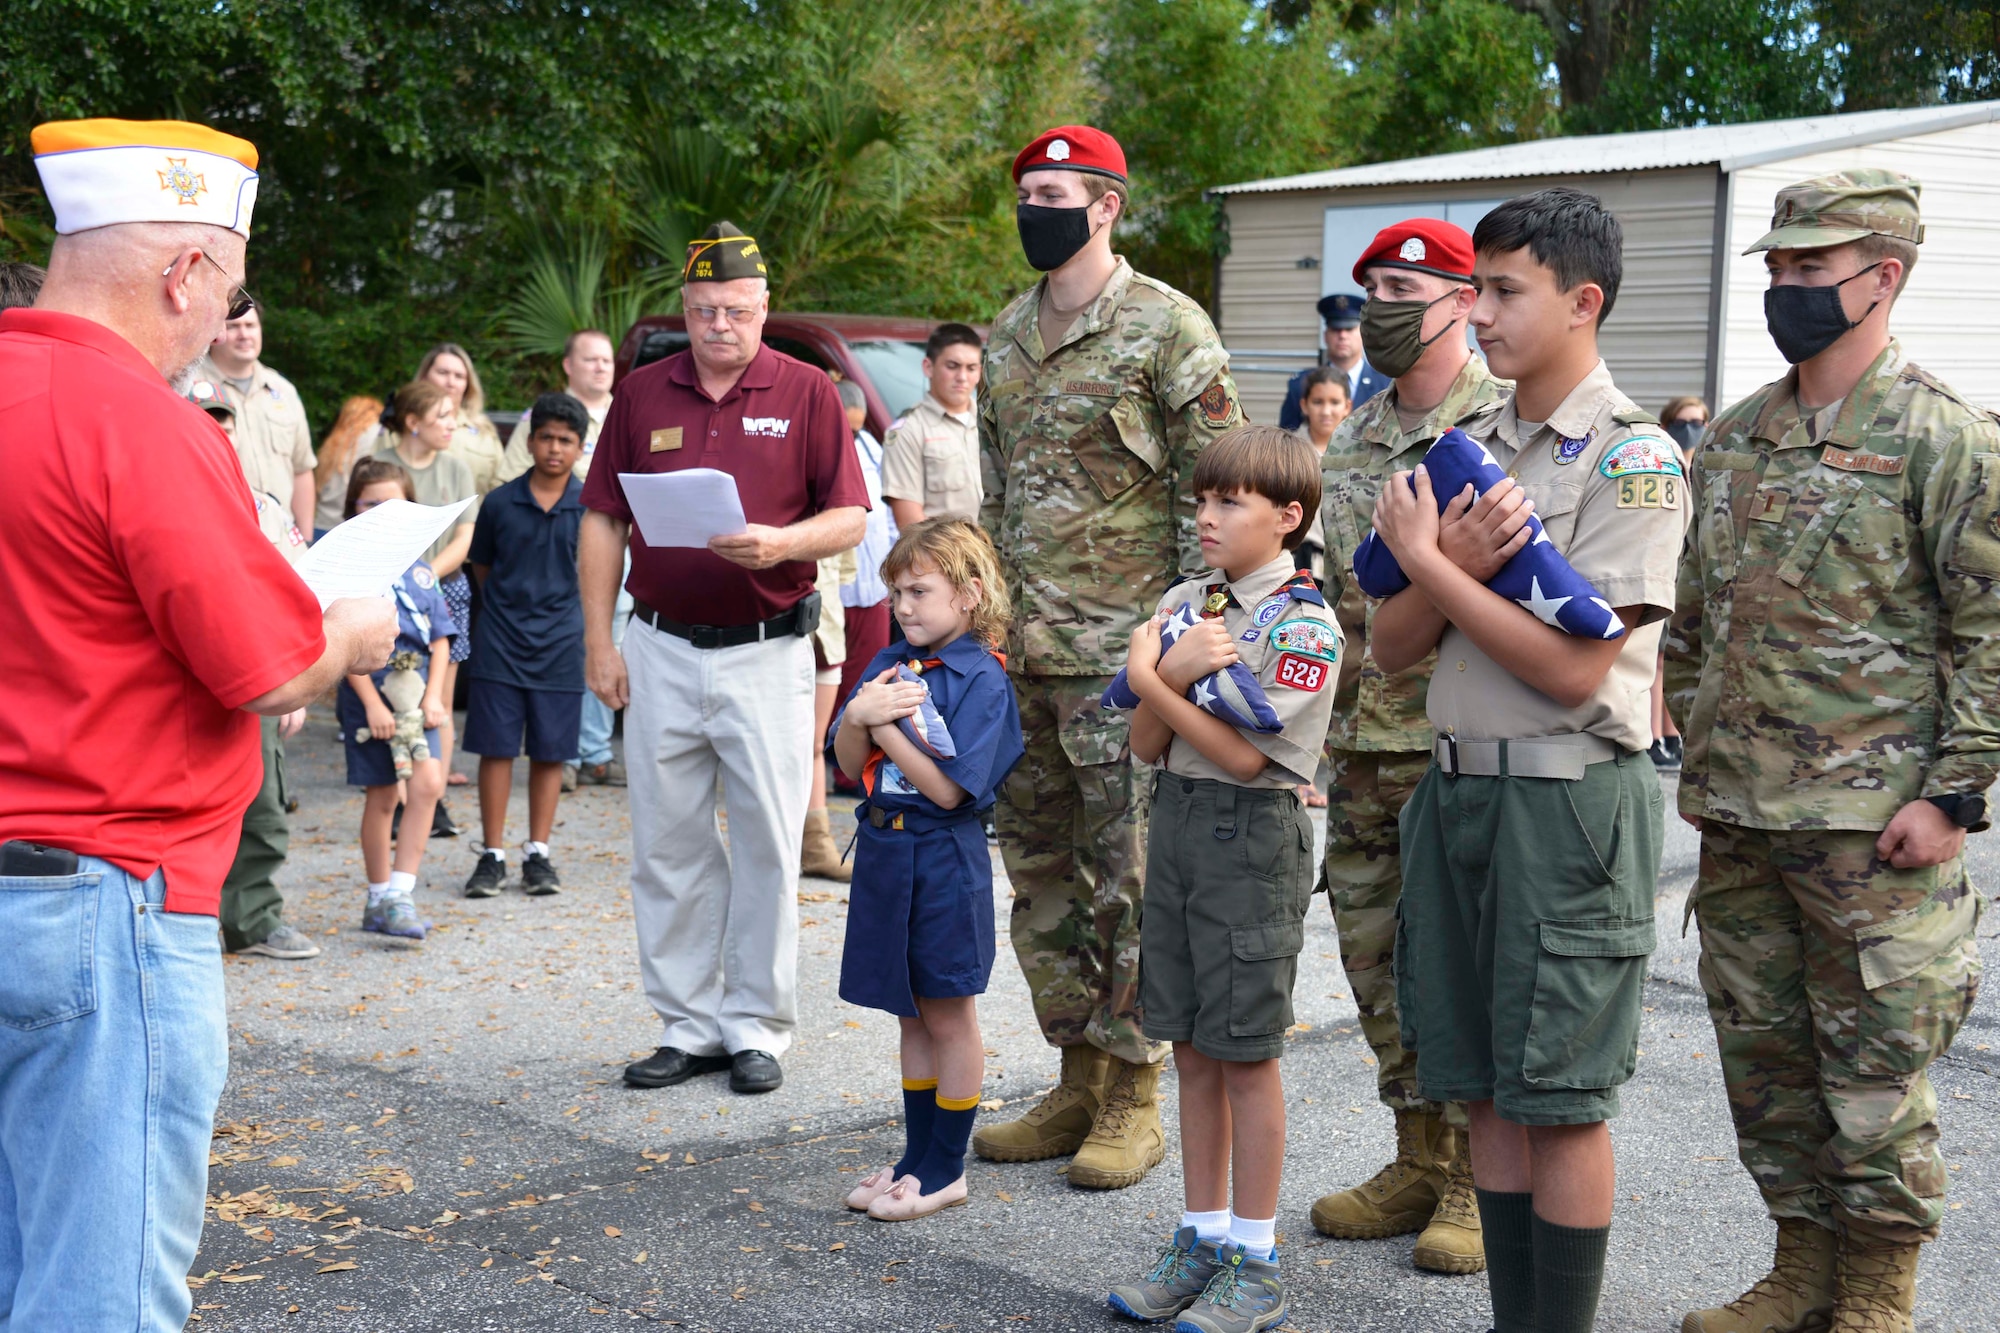 We stand off to the side as three children in boy and girl scout uniforms face a man in a red shirt and blue pants reading from a paper during a Veterans Day ceremony. Behind the two boys and a girl stand three Special Tactics Airmen at attention.To the children's right stands a man in a burgundy shirt and white pants reading along from a piece of paper.  In the distance we can see families standing and watching the ceremony.